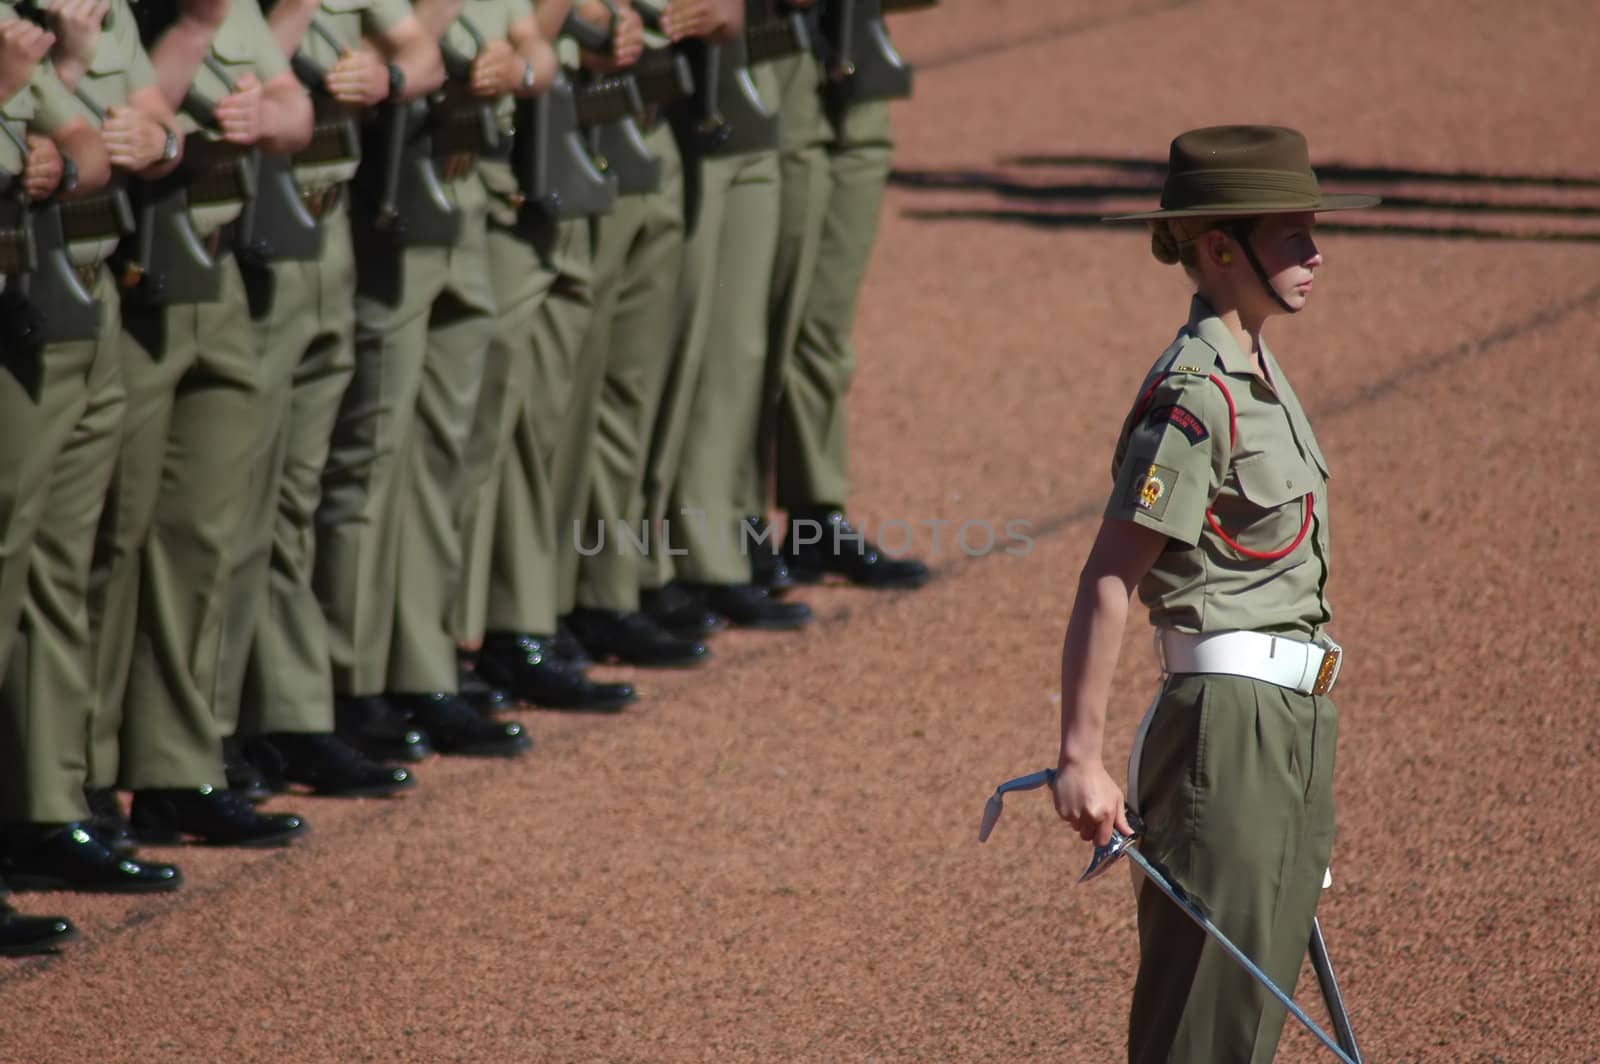 30. SEPTEMBER 2006 - CANBERRA, AUSTRALIA - australian soldiers during a promenade at Anzac parade, Canberra, Australia